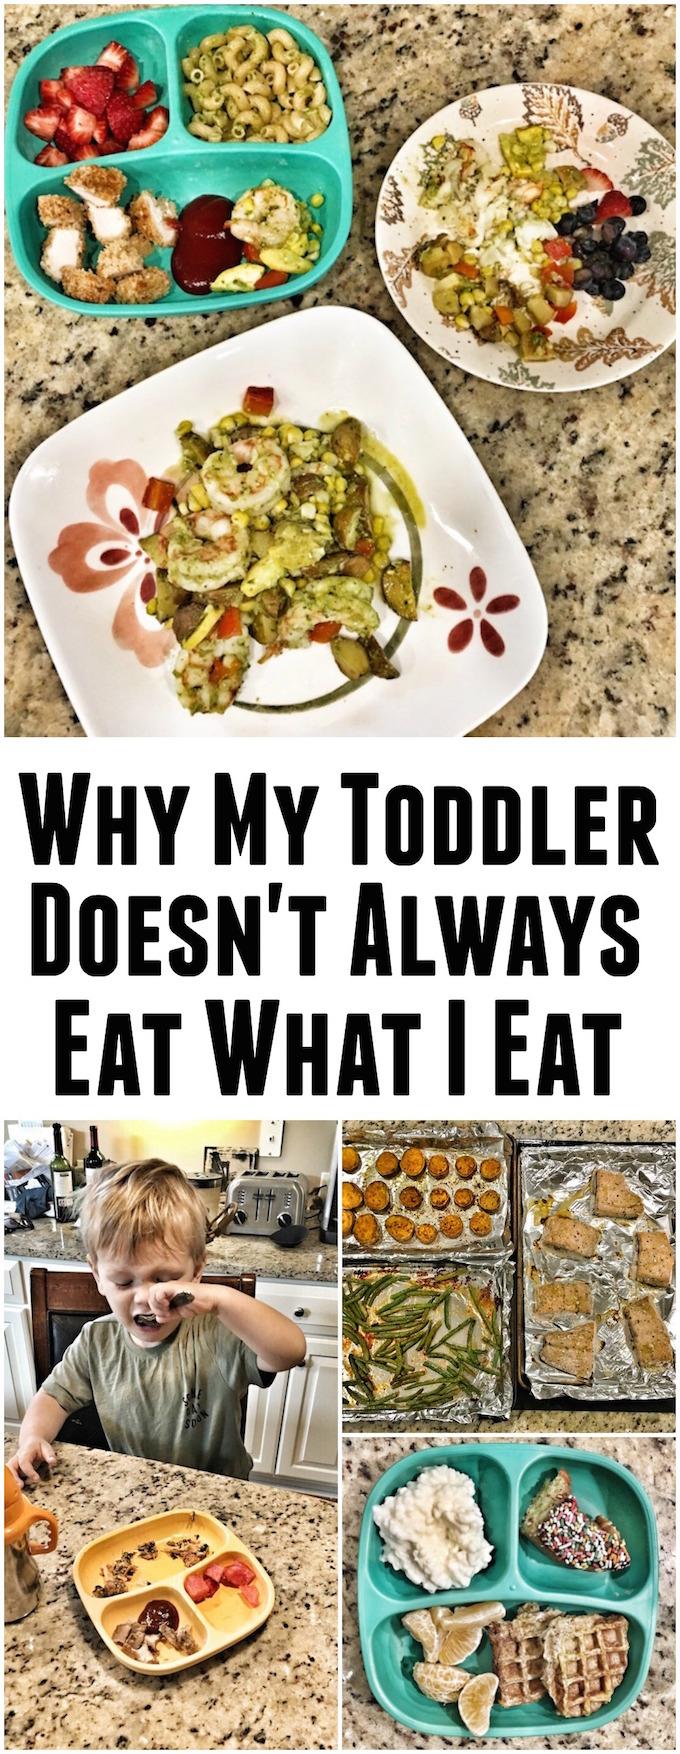 If you're looking for tips for feeding toddlers, here's my approach as a Registered Dietitian. Spoiler alert- sometimes I serve two different meals!